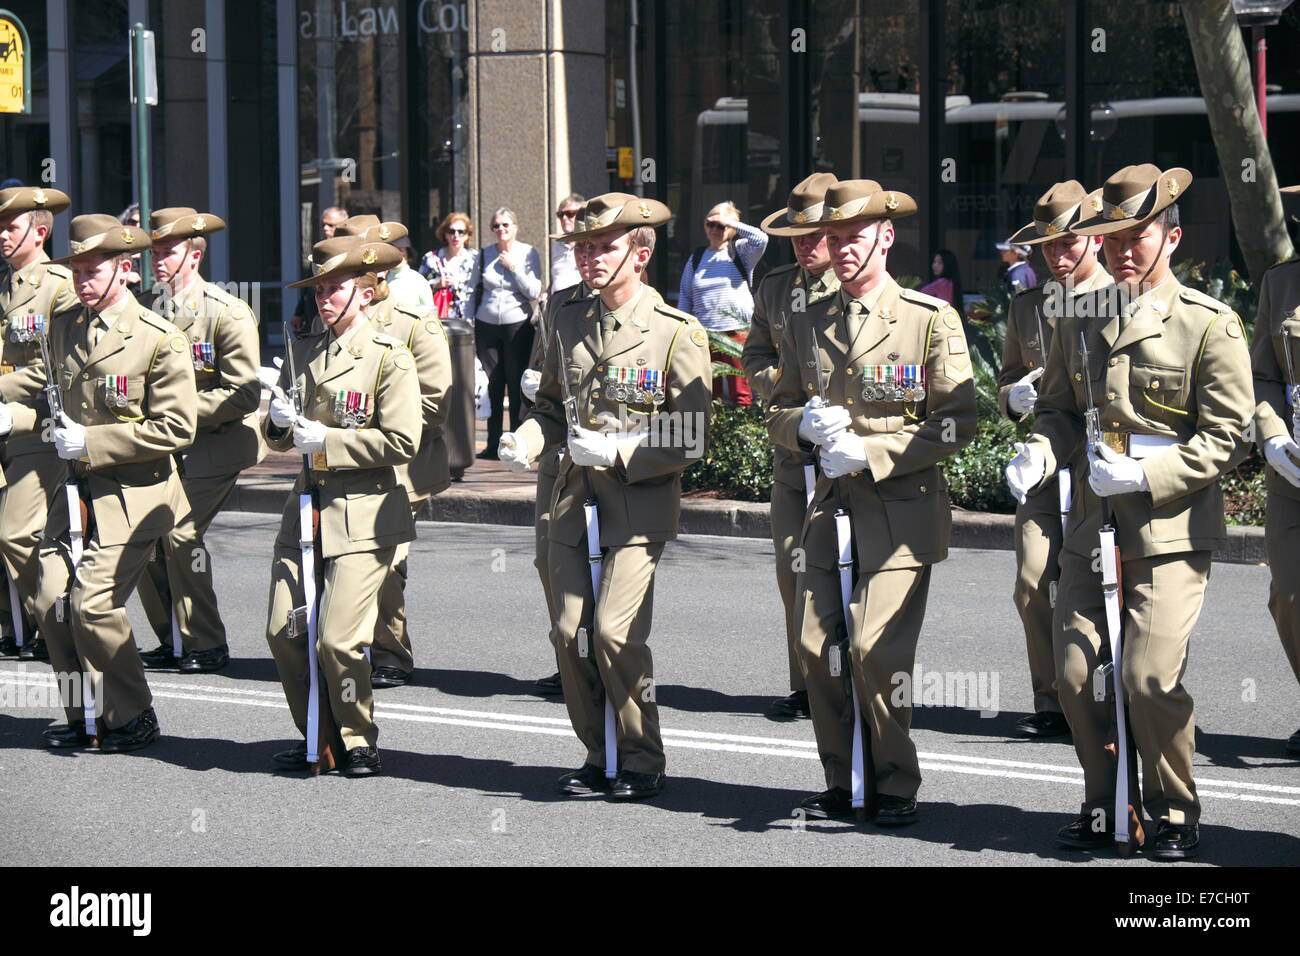 Australian military personnel in macquarie street sydney as part of Governor Bashir opening of the 55th State parliament,Sydney Stock Photo